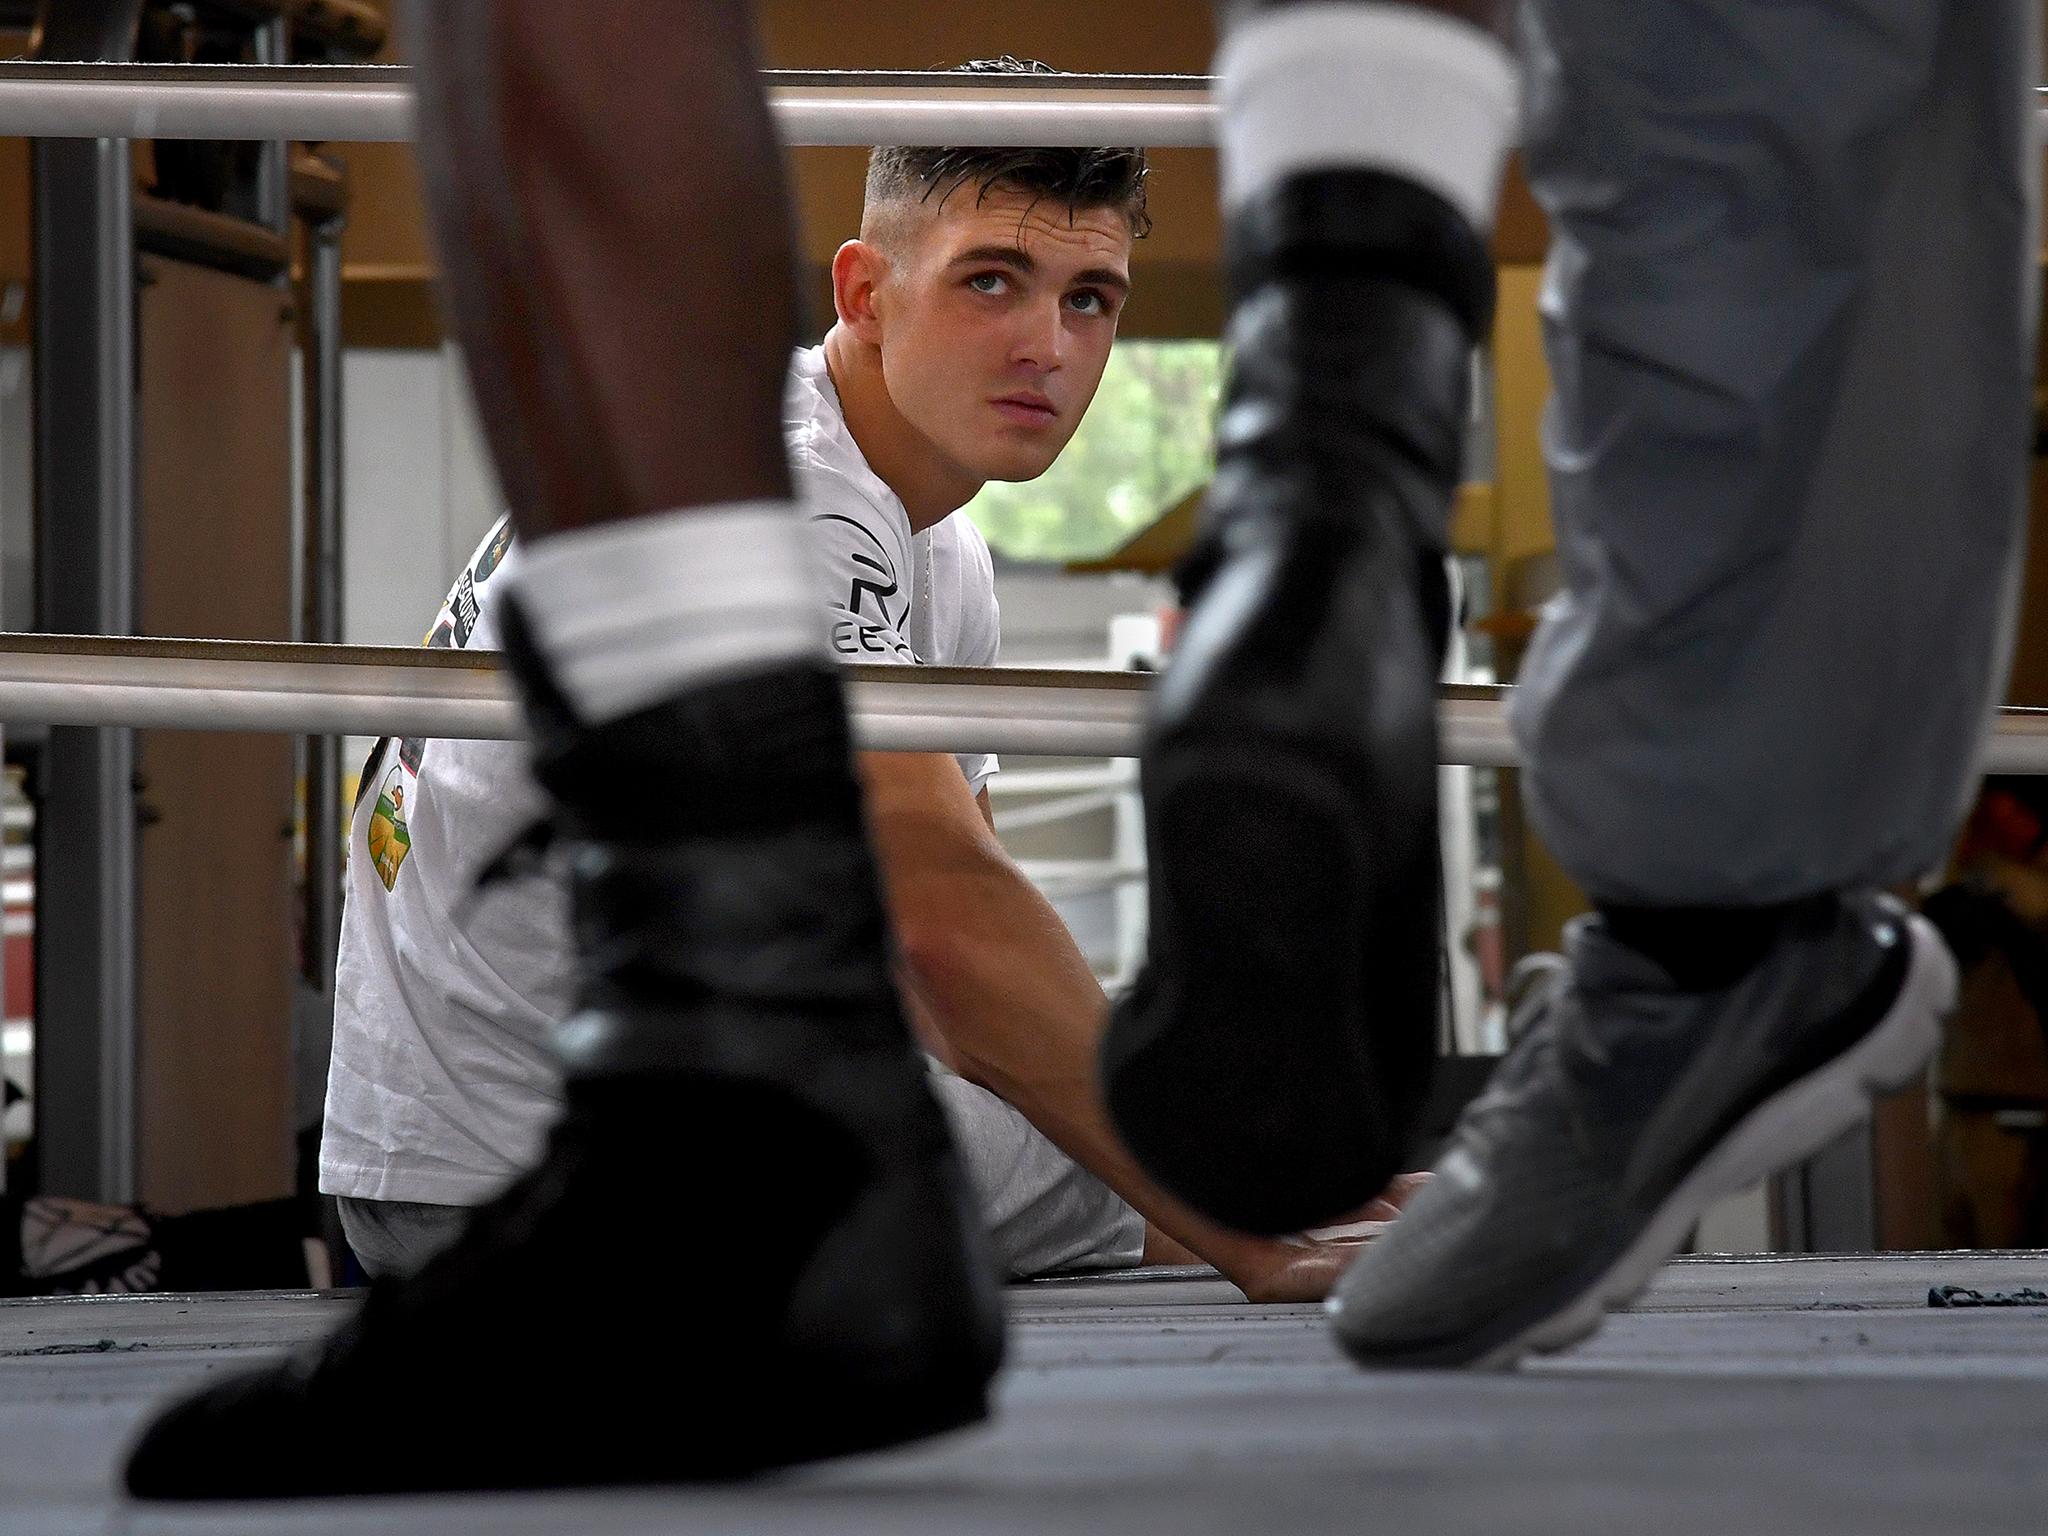 Irish boxer Lee Reeves watches local professional boxers spar at the Bald Eagle Recreation Center in Southwest Washington